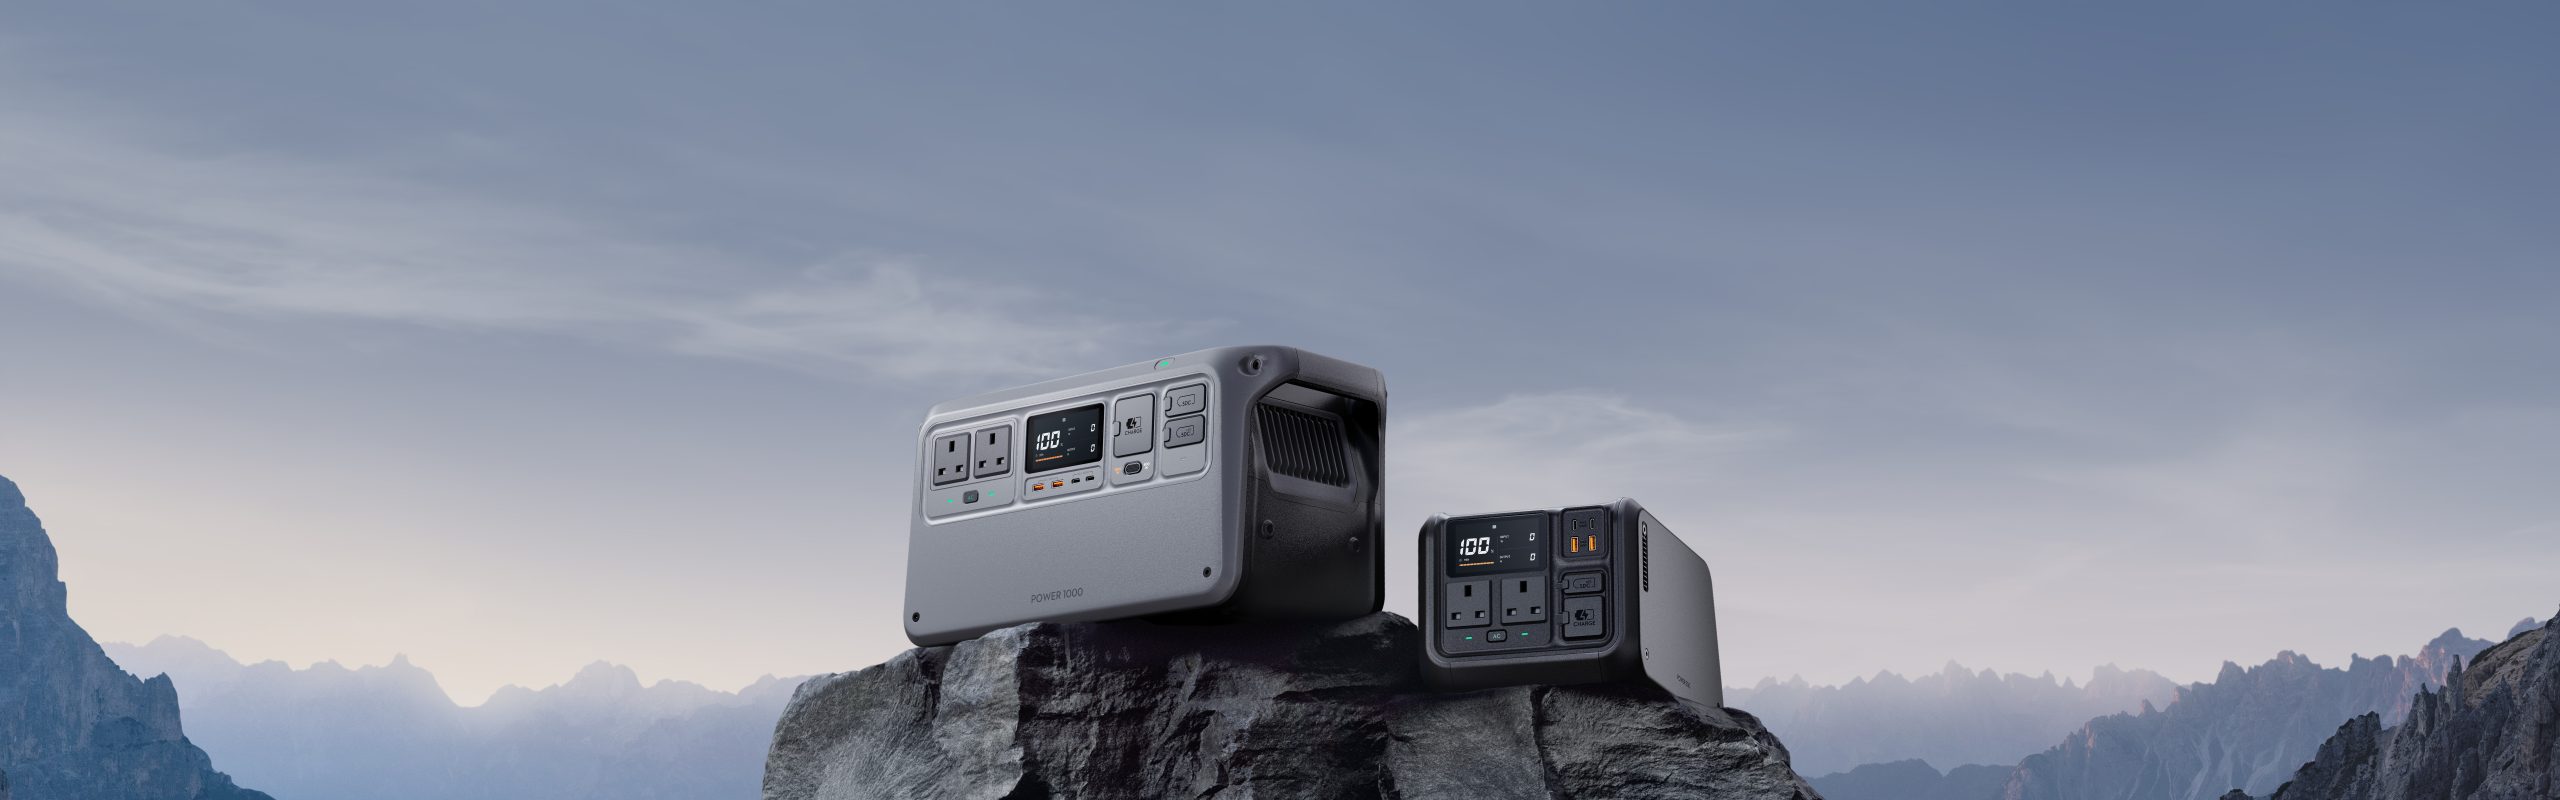 DJI Power 1000 and Power 500 (Image: Supplied by DJI)